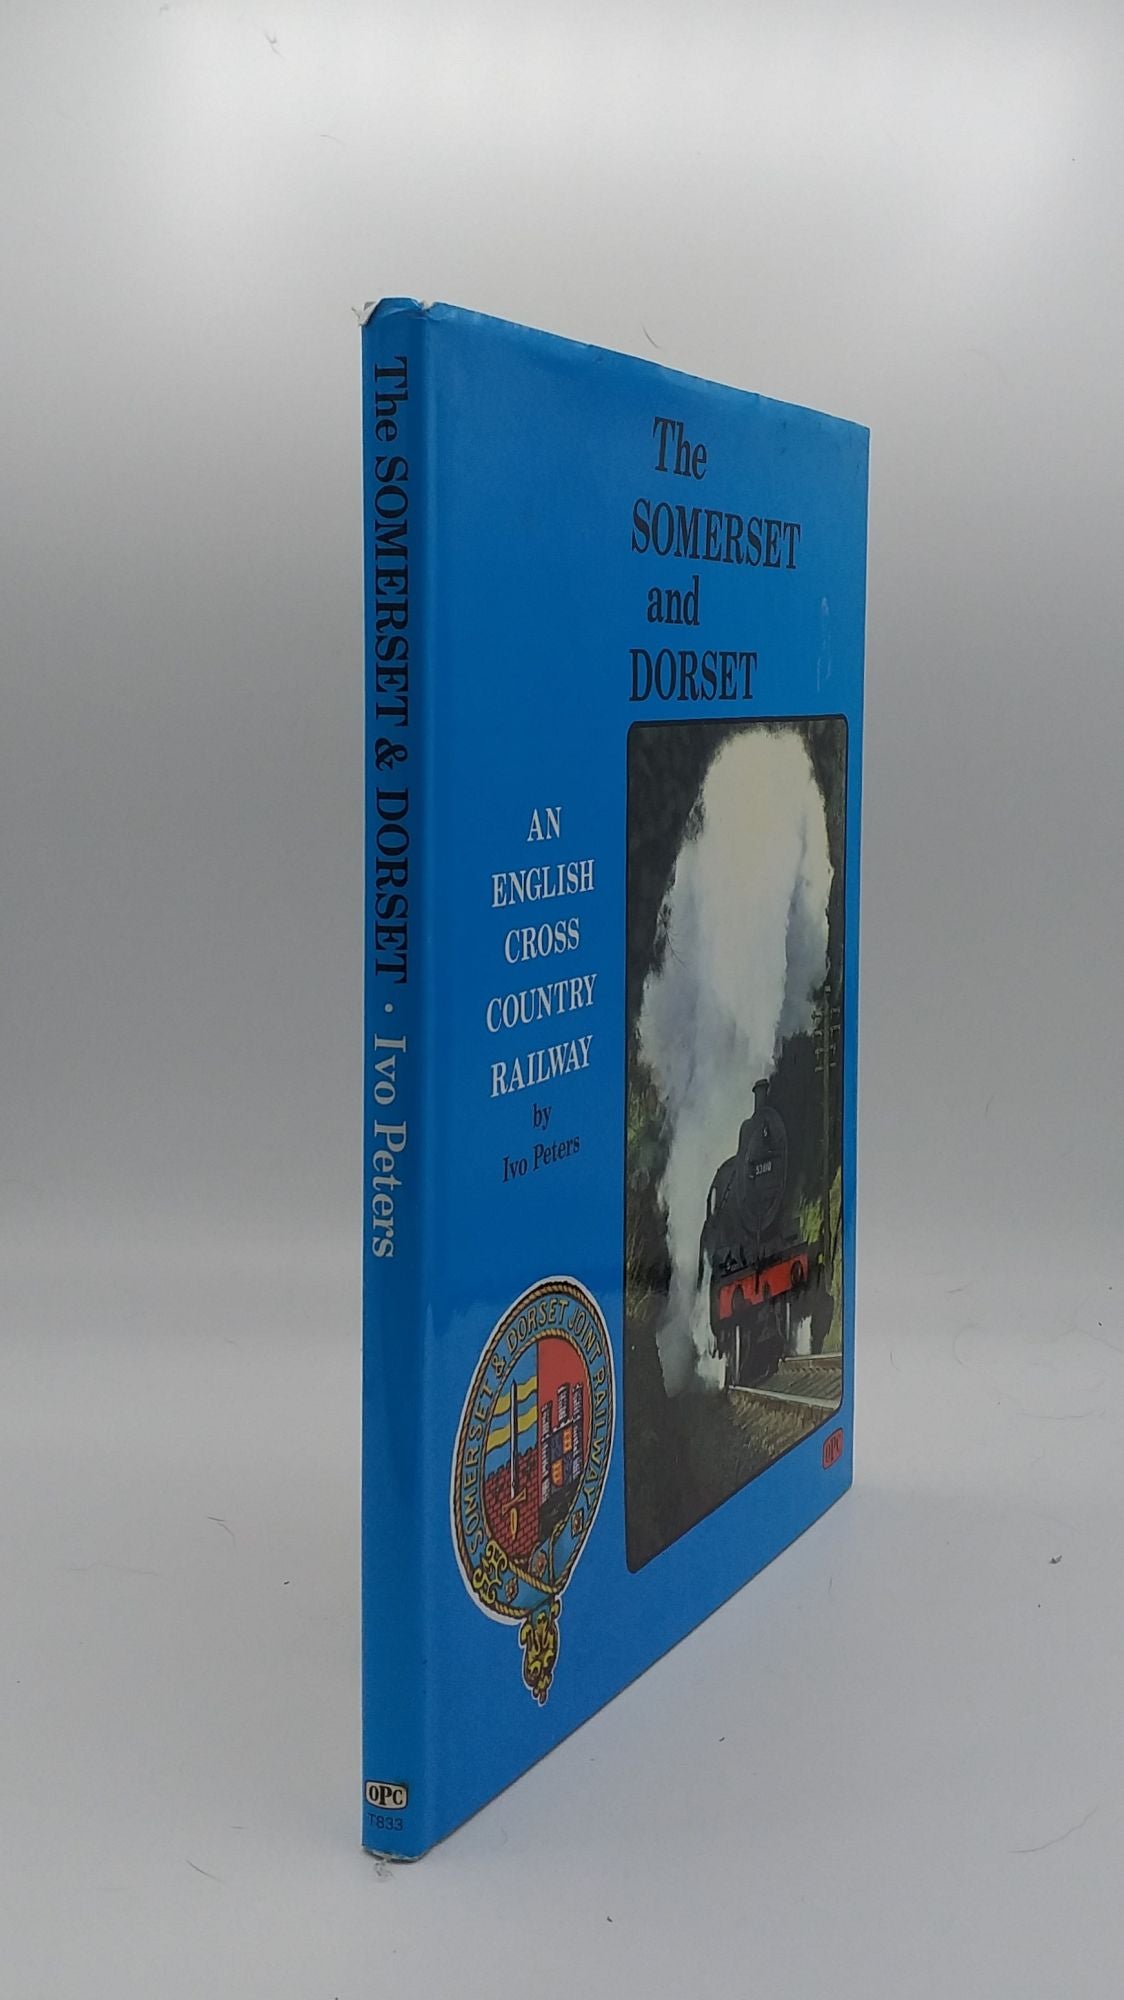 PETERS Ivo - The Somerset and Dorset an English Cross-Country Railway